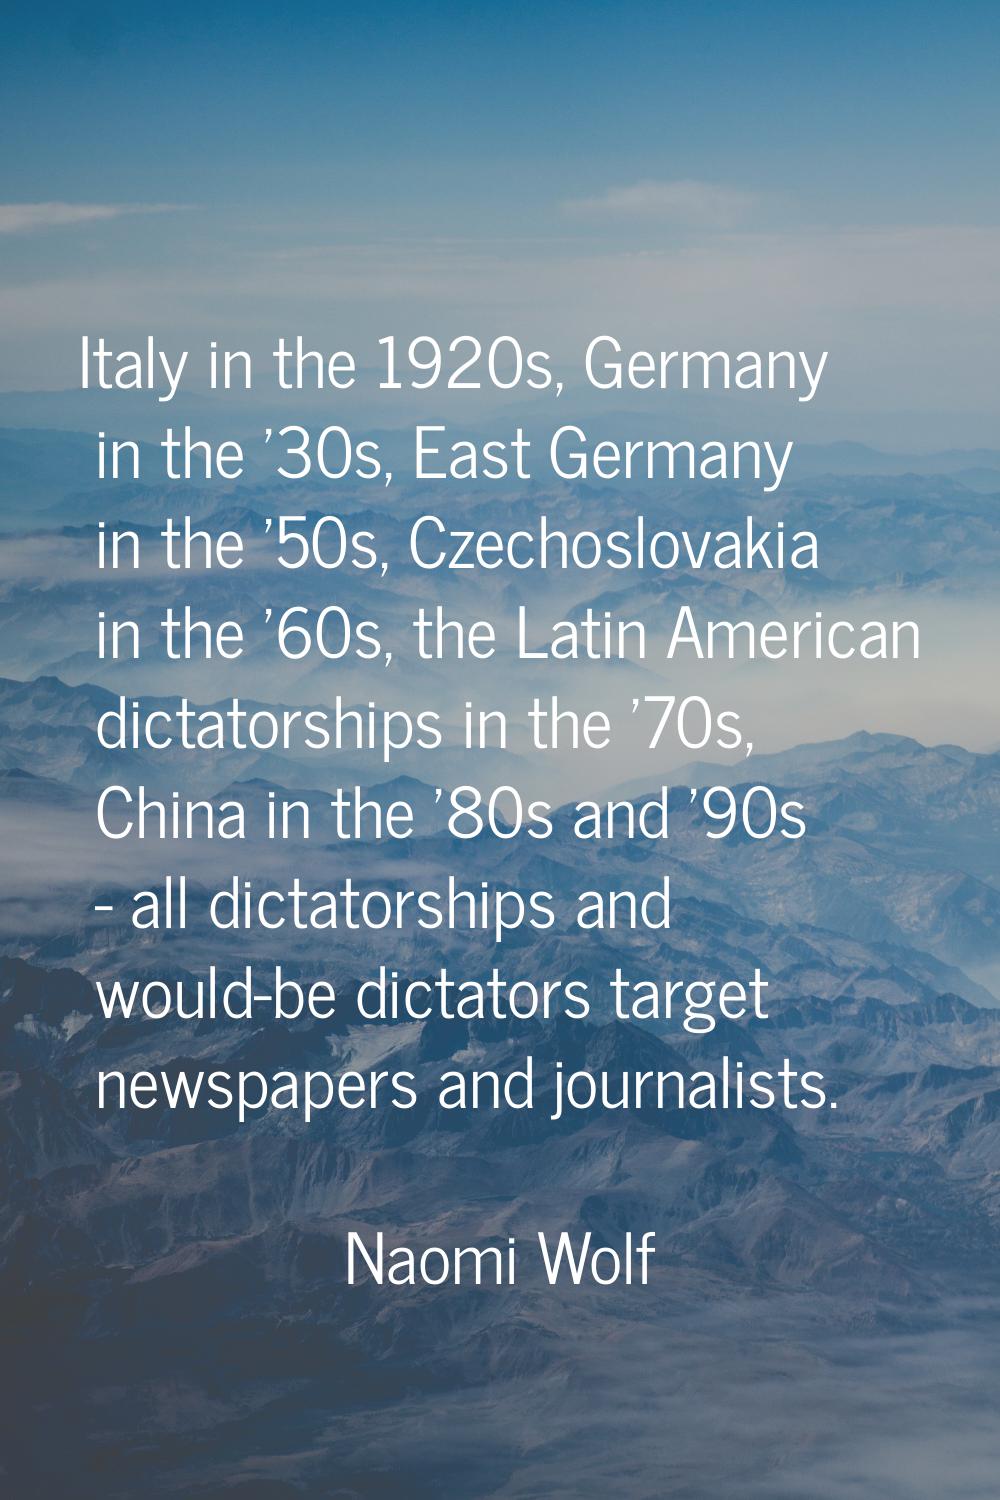 Italy in the 1920s, Germany in the '30s, East Germany in the '50s, Czechoslovakia in the '60s, the 